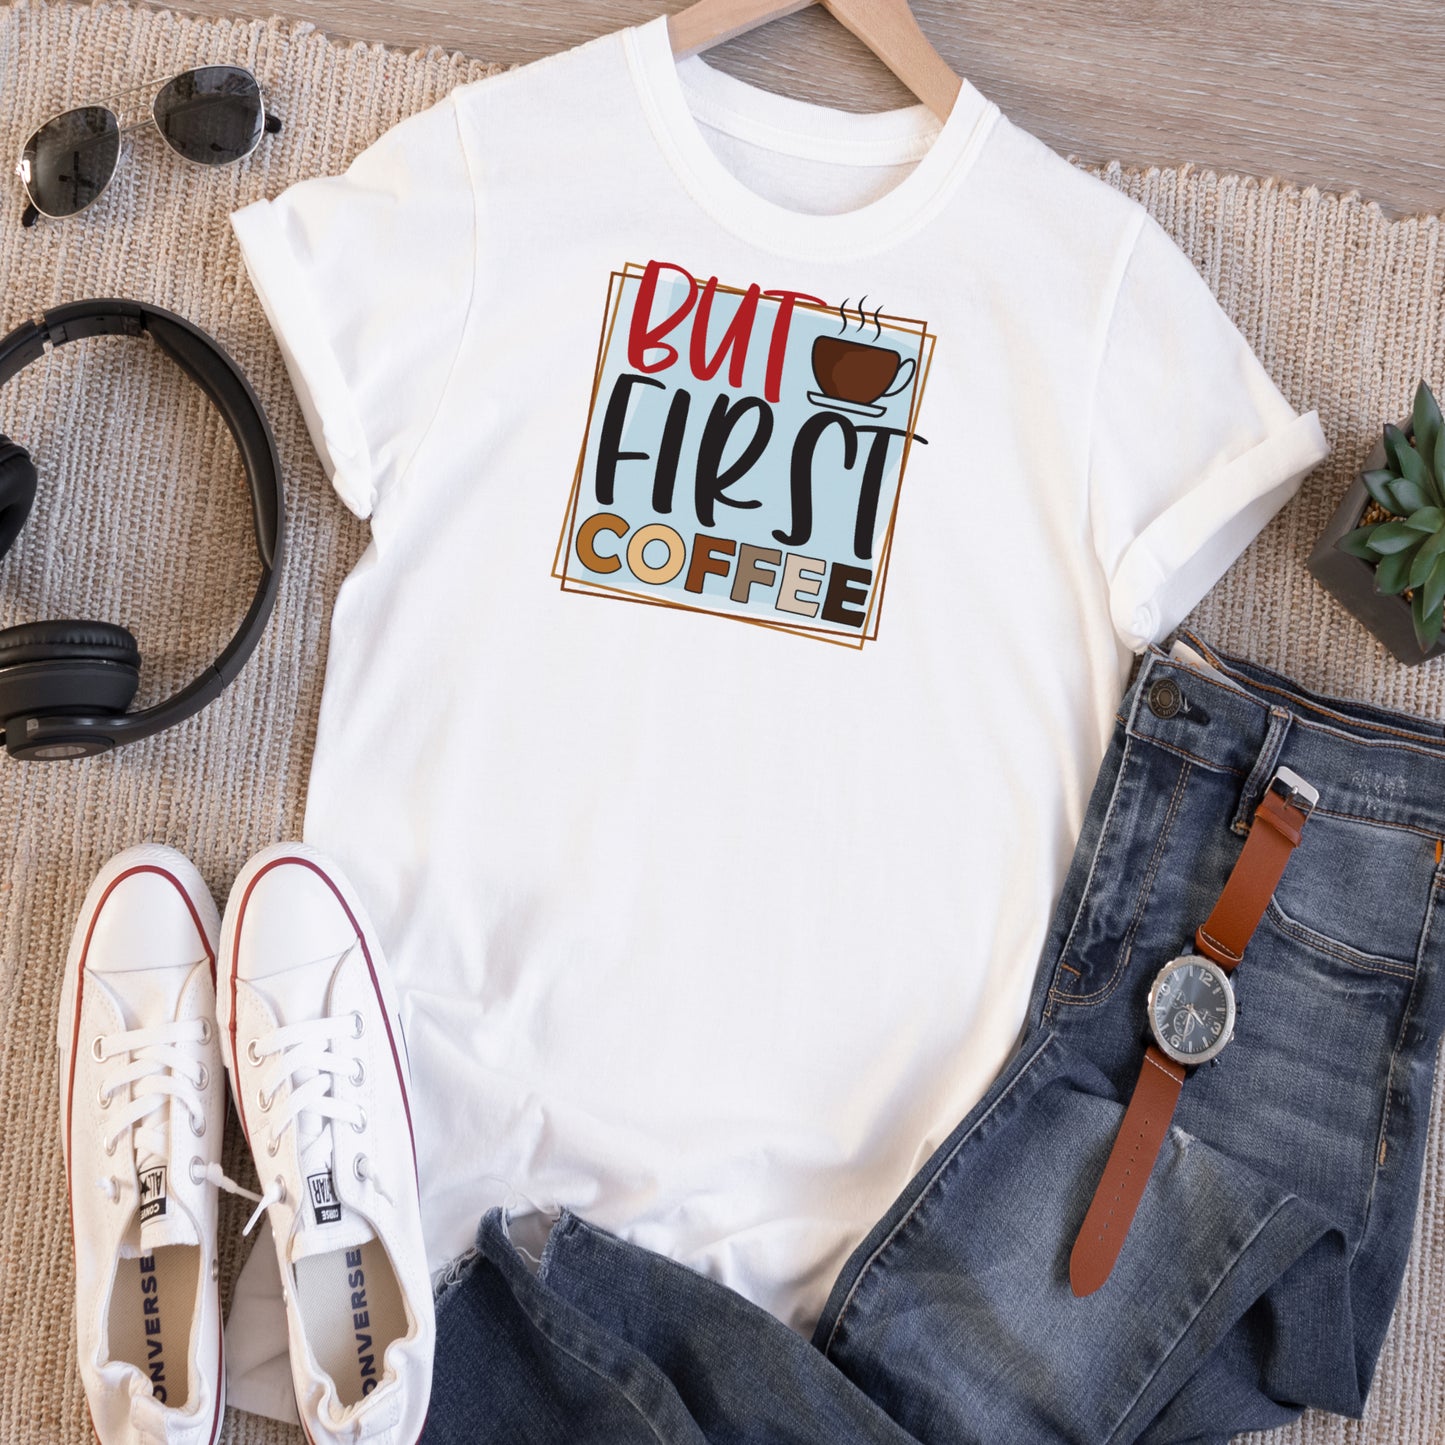 White short sleeve Tshirt with a vinage graphic that says But First Coffee in colors of red, black,brown,with a blue background.